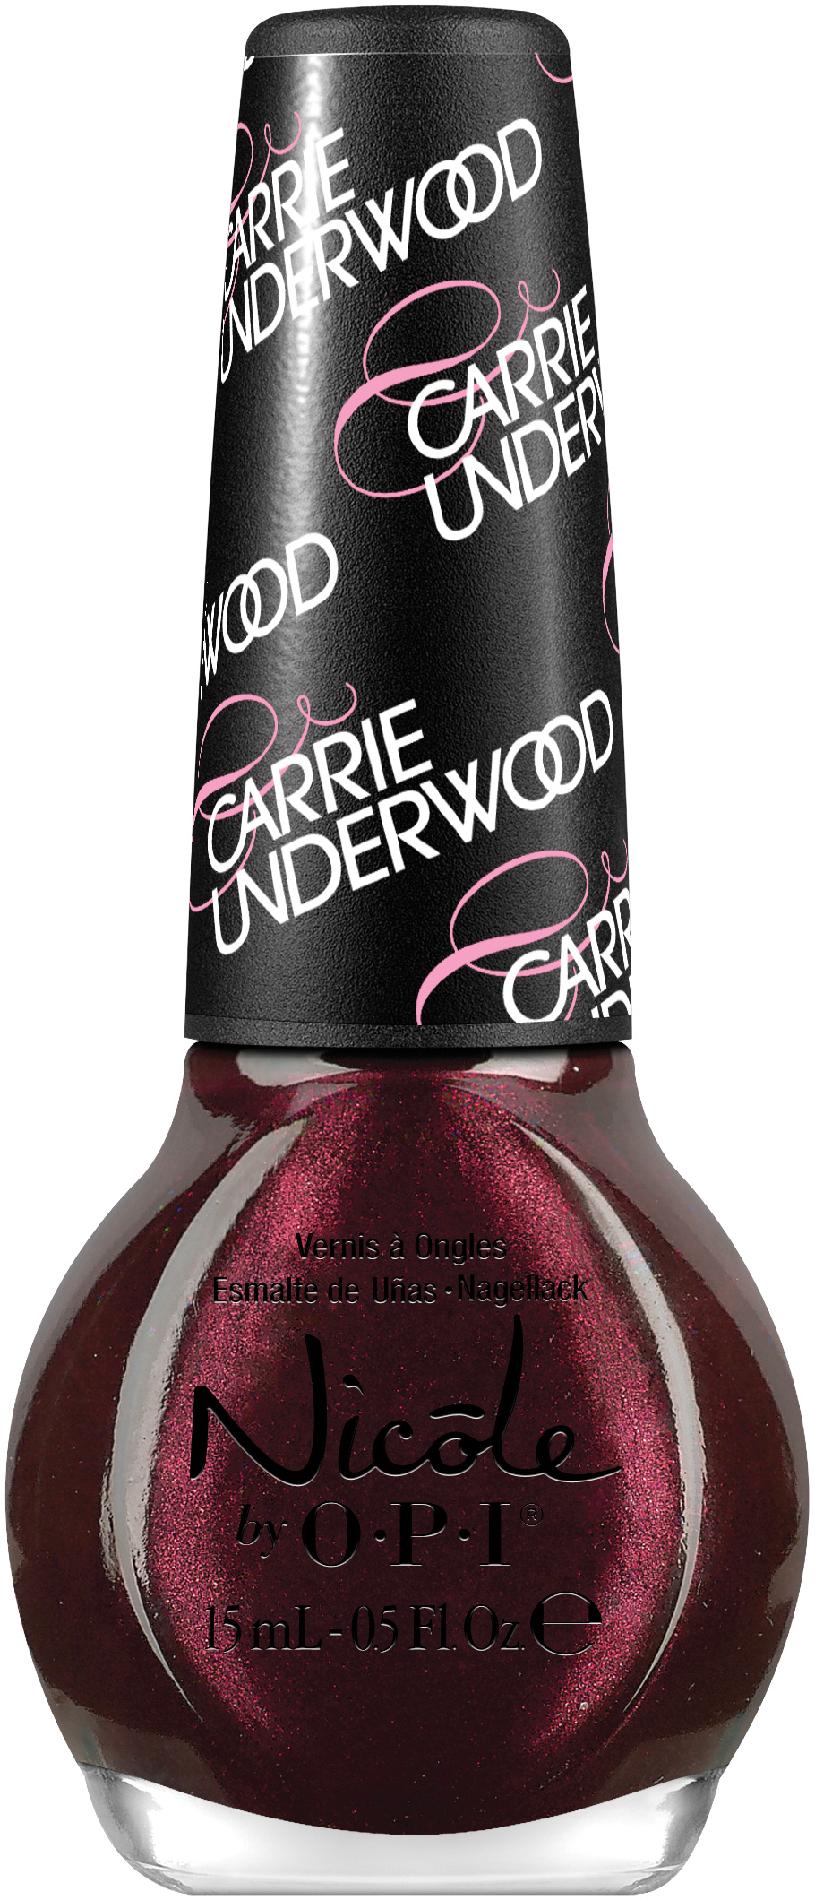 Carrie Underwood, Nail Lacquers, Backstage Pass, 0.5 fl oz.